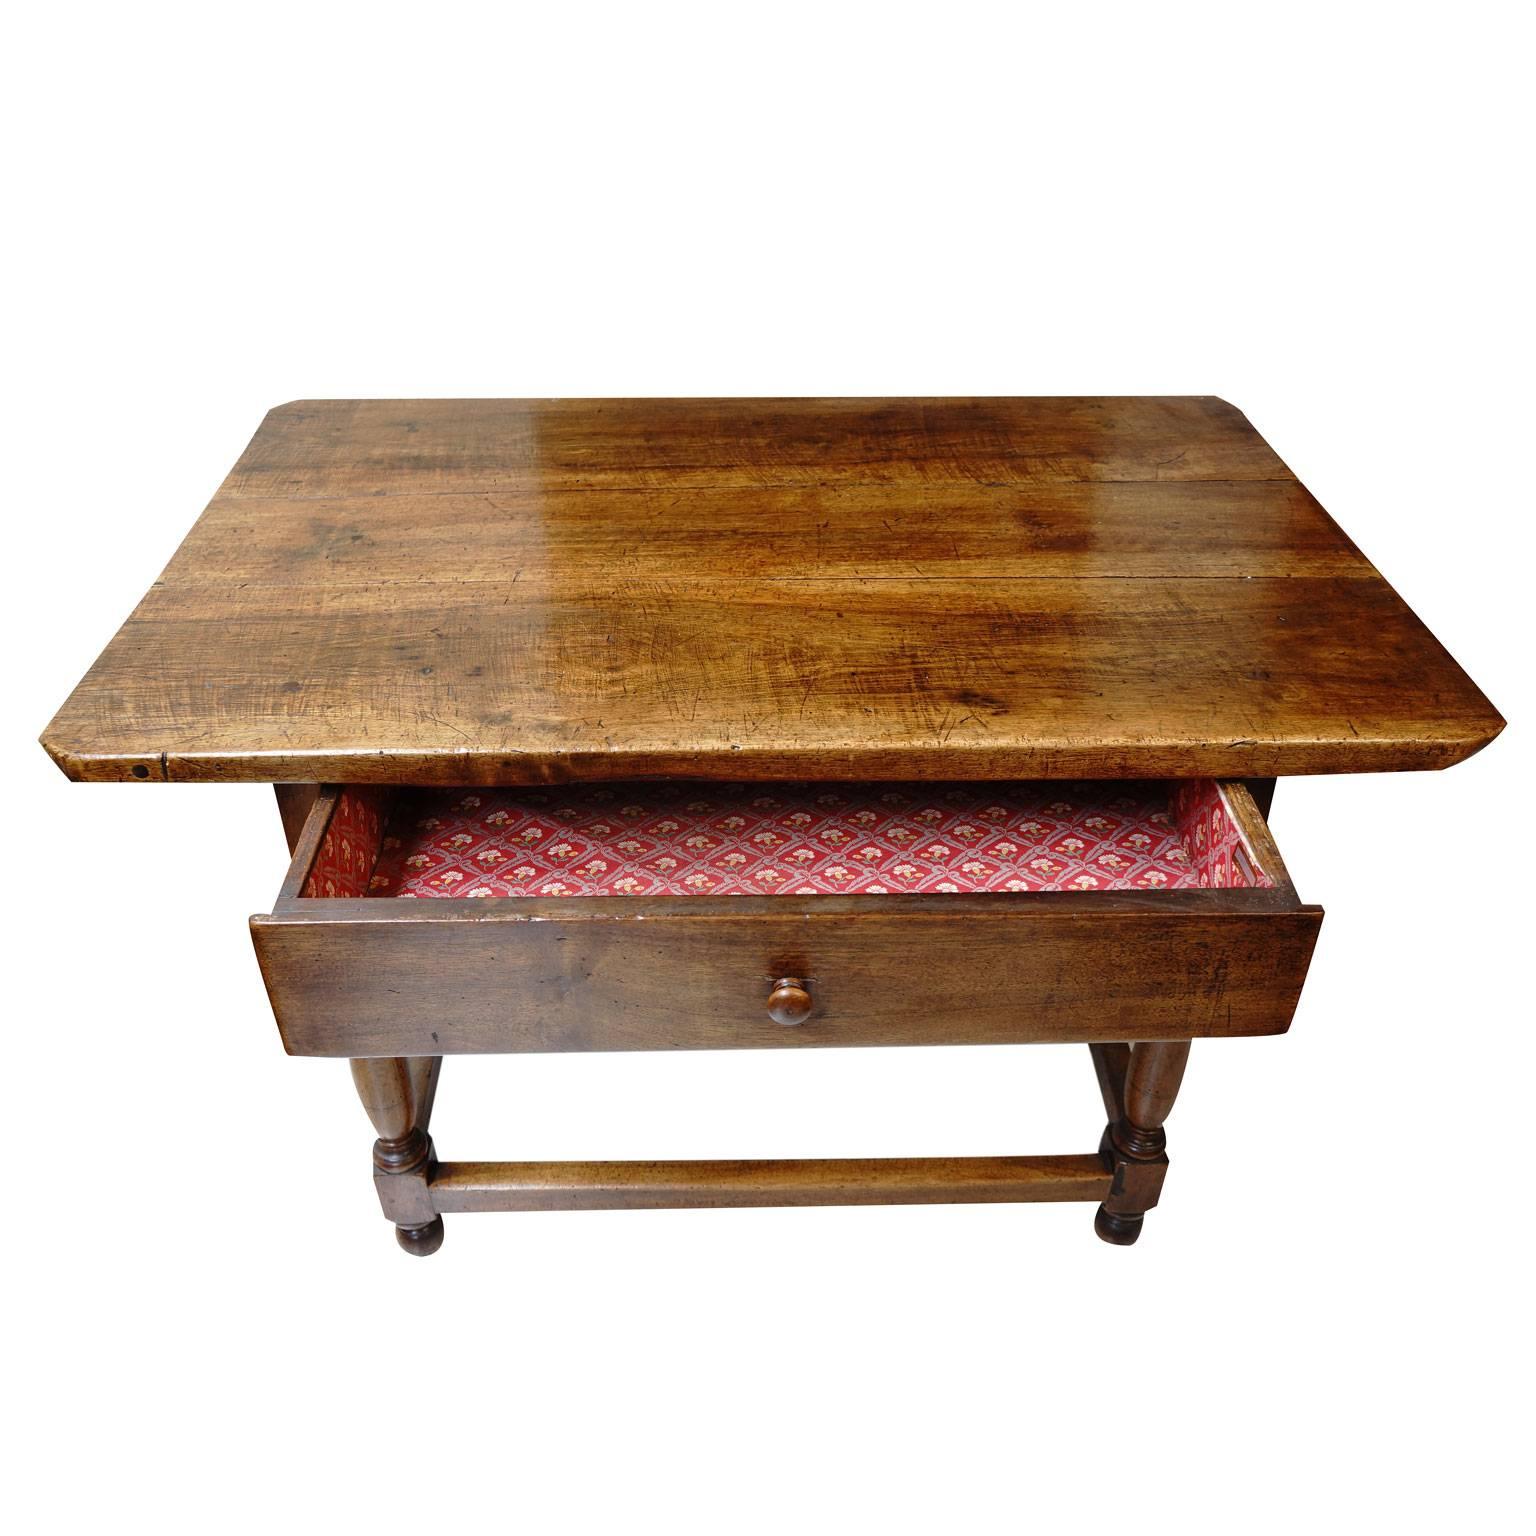 This beautiful 18th Century French walnut table has finely turned legs and a beautiful deep, buttery patina that has developed over age. The table has one large drawer.